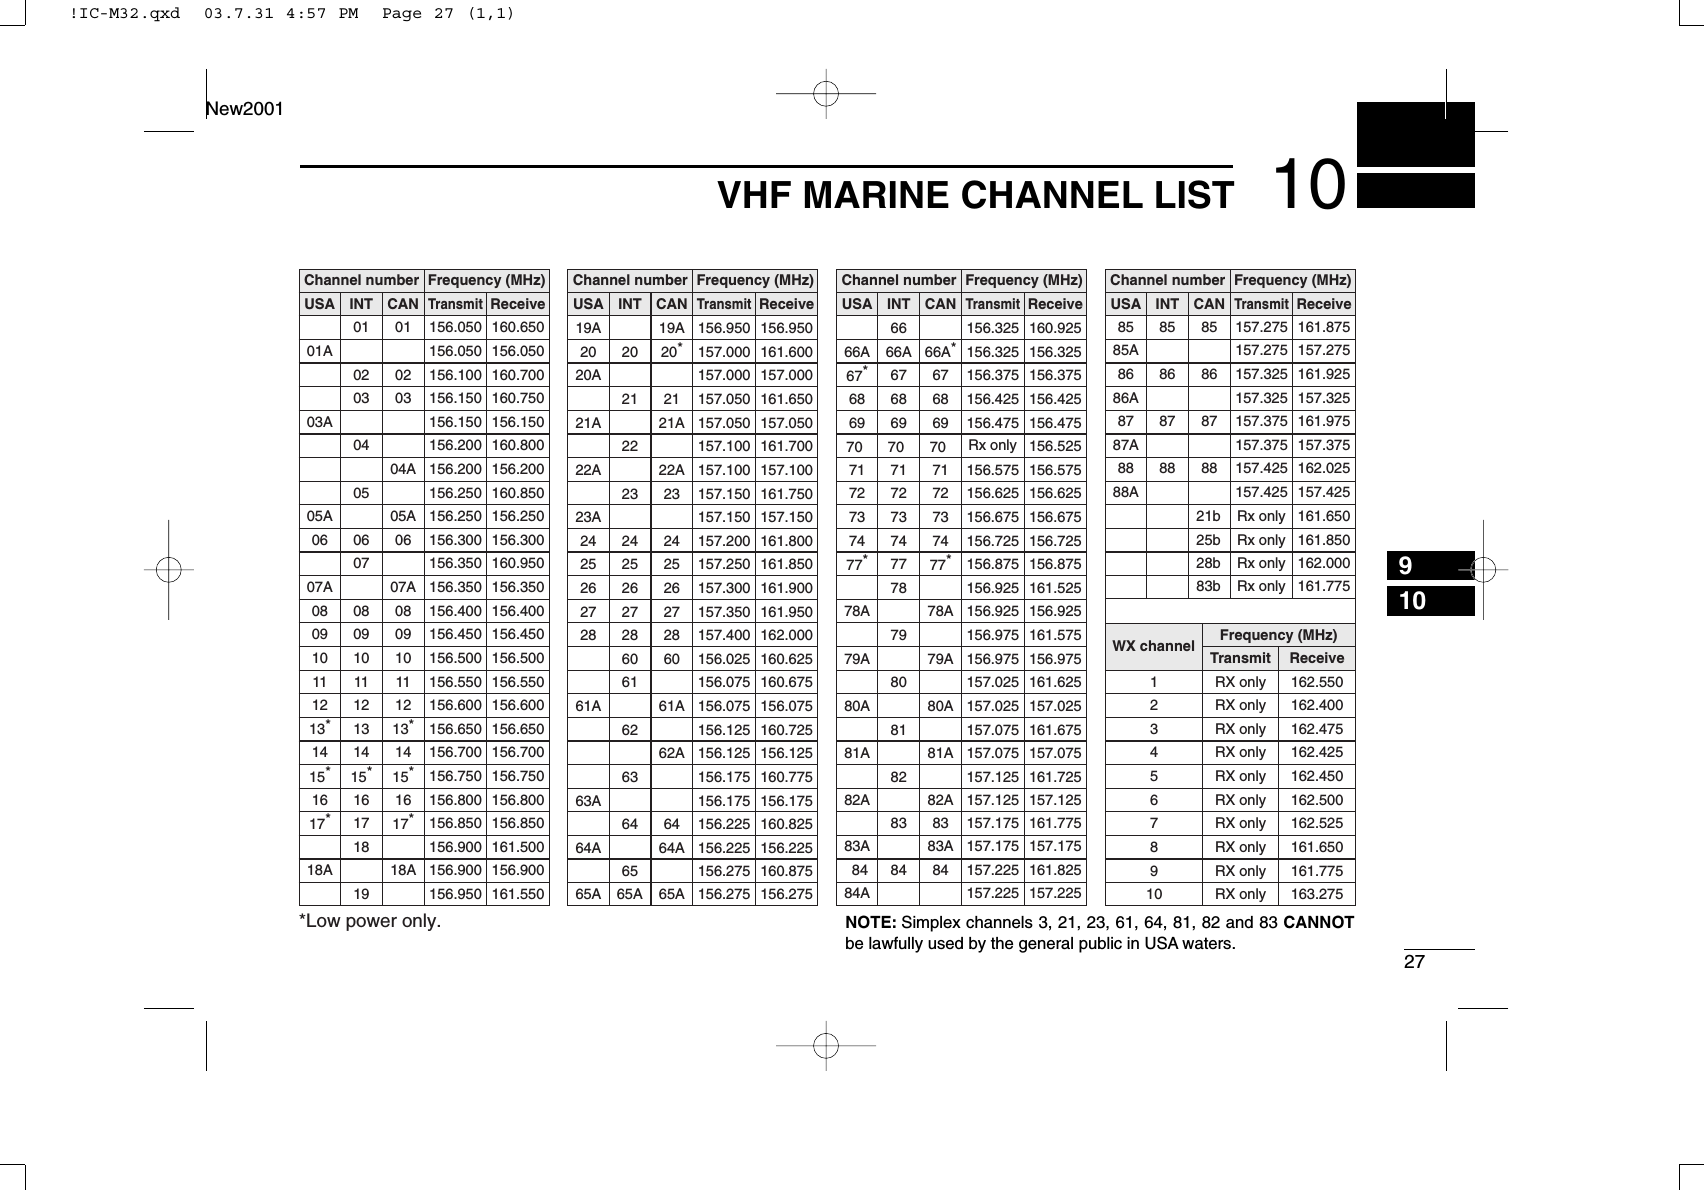 2710VHF MARINE CHANNEL LIST910New2001Channel numberUSA CANTransmitReceiveFrequency (MHz)INTChannel number Frequency (MHz)USA CANTransmitReceiveINTChannel number Frequency (MHz)USA CANTransmitReceiveINTChannel number Frequency (MHz)USA CANTransmitReceiveINTWX channel Frequency (MHz)Transmit Receive01 156.050 160.65001A 156.050 156.05002 156.100 160.70003 156.150 160.75003A 156.150 156.150156.200 160.80004A 156.200 156.200156.250 160.85005A 05A 156.250 156.25006 06 156.300 156.300156.350 160.95007A 07A 156.350 156.35008 08 156.400 156.40009 09 156.450 156.45010 10 156.500 156.50011 11 156.550 156.55012 12 156.600 156.60013*13*156.650 156.65014 14 156.700 156.70015*15*156.750 156.75016 16 156.800 156.80017*17*156.850 156.850156.900 161.50018A 18A 156.900 156.900010203040506070809101112131415*161718156.950 161.55019A 19A 156.950 156.95020 20*157.000 161.60021 157.050 161.65021A 21A 157.050 157.050157.100 161.70022A 22A 157.100 157.10023 157.150 161.75023A 157.150 157.15024 24 157.200 161.80025 25 157.250 161.85026 26 157.300 161.90027 27 157.350 161.95028 28 157.400 162.00060 156.025 160.625156.075 160.67561A 61A 156.075 156.075156.125 160.72562A 156.125 156.125156.175 160.77563A 156.175 156.17564 156.225 160.82564A 64A 156.225 156.22519202122232425262728606162636420A 157.000 157.00066A 66A*156.325 160.92567*67 156.375 156.37568 68 156.425 156.42569 69 156.475 156.47570 70 156.52571 71 156.575 156.57572 72 156.625 156.62573 73 156.675 156.67574 74 156.725 156.72577*77*156.875 156.875156.925 161.52578A 78A 156.925 156.925156.975 161.57579A 79A 156.975 156.975157.025 161.62580A 80A 157.025 157.025157.075 161.67581A 81A 157.075 157.075157.125 161.72582A 82A 157.125 157.125666768697071727374777879808182156.325 156.32566A85 85 157.275 161.87585A 157.275 157.27586 86 157.325 161.92586A 157.325 157.32587 87 157.375 161.97587A 157.375 157.37588 88 157.425 162.02588A 157.425 157.4258586878821b Rx onlyRx only161.65025b Rx only 161.85028b Rx only 162.00083b Rx only 161.77541 RX only 162.5502 RX only 162.4003 RX only 162.4755 RX only 162.4506 RX only 162.5007 RX only 162.5258 RX only 161.6509 RX only 161.77510 RX only 163.275RX only 162.425156.275 160.87565A 65A 156.275 156.2756565A 84A83 157.175 161.77583A 83A 157.175 157.17584 84 157.225 161.8258384157.225 157.225*Low power only.NOTE: Simplex channels 3, 21, 23, 61, 64, 81, 82 and 83 CANNOTbe lawfully used by the general public in USA waters.!IC-M32.qxd  03.7.31 4:57 PM  Page 27 (1,1)